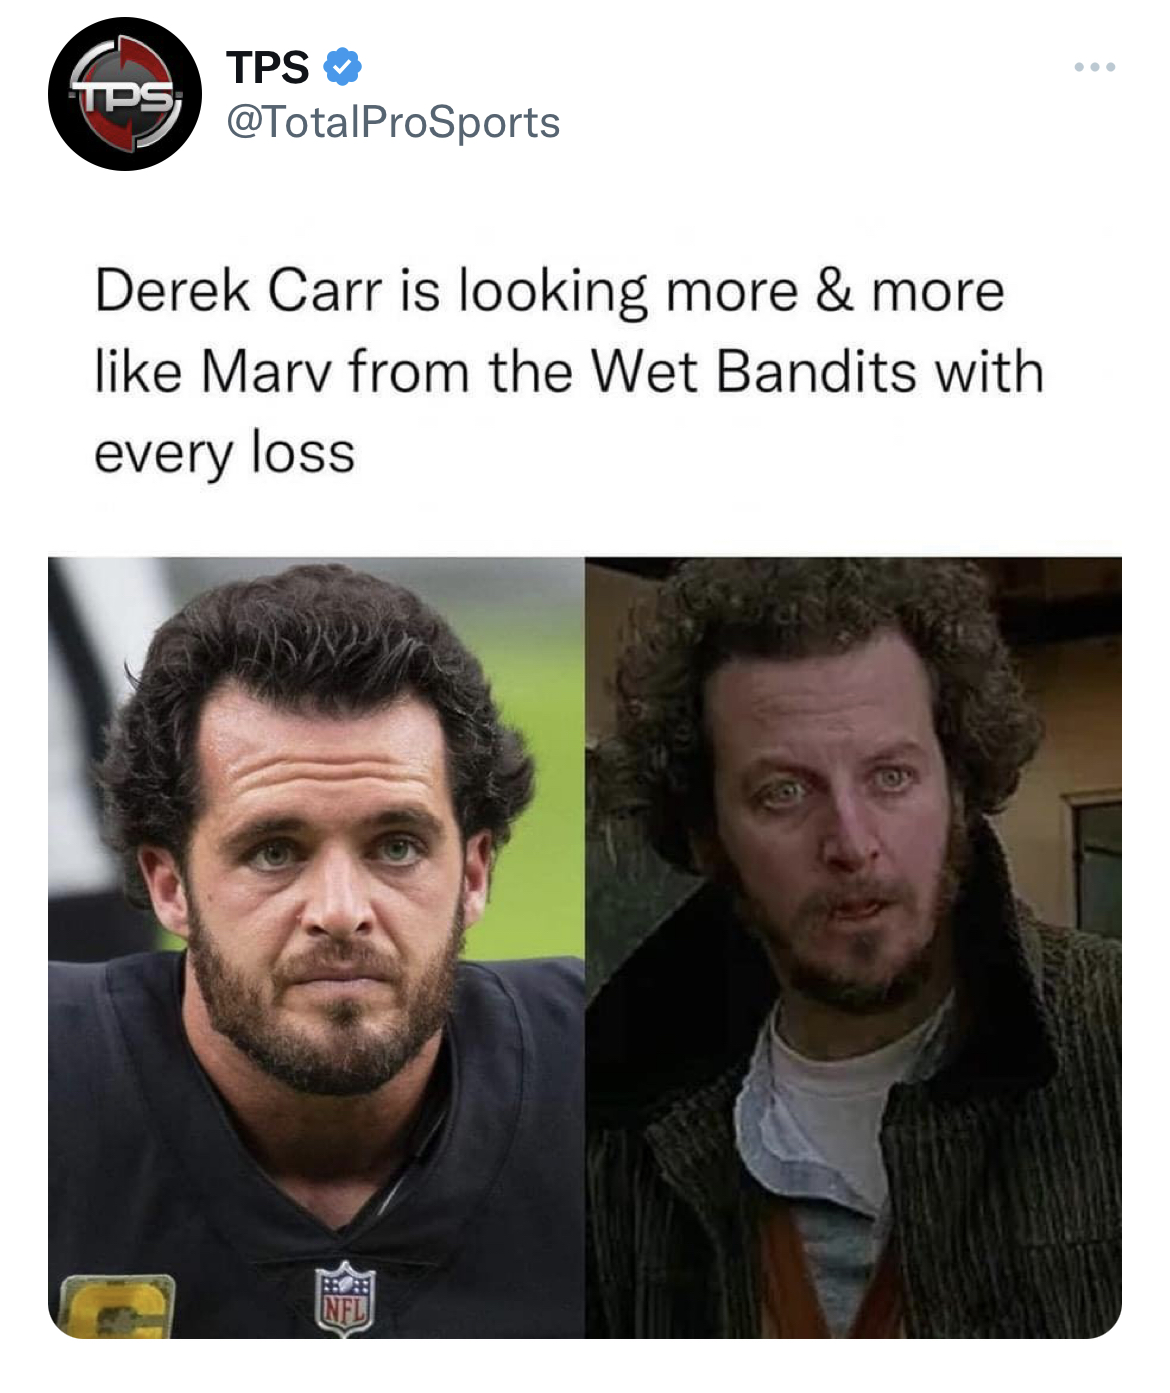 tweets roasting celebs - beard - Tps Derek Carr is looking more & more Marv from the Wet Bandits with every loss